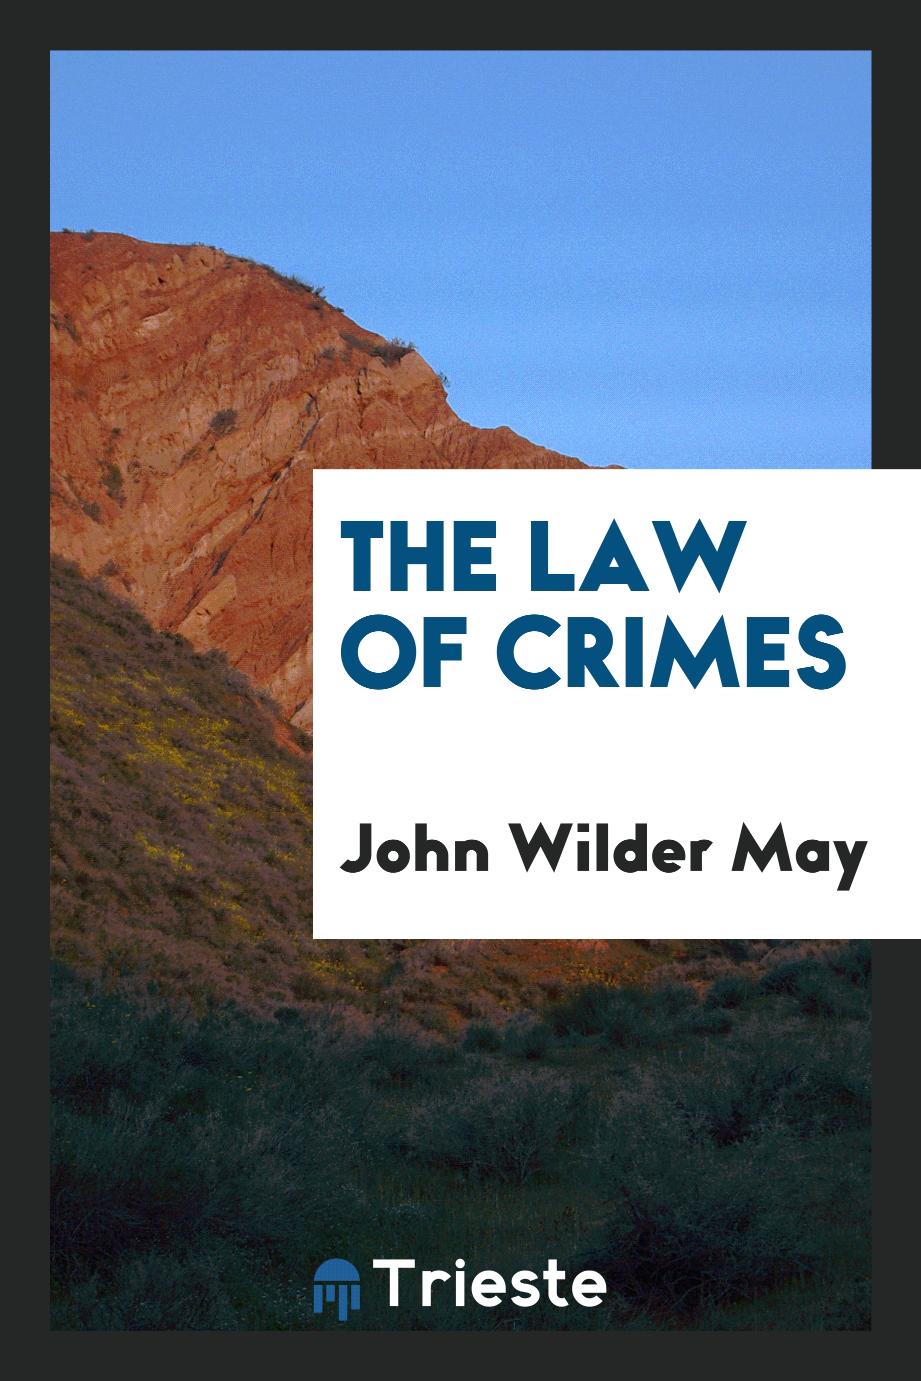 The law of crimes